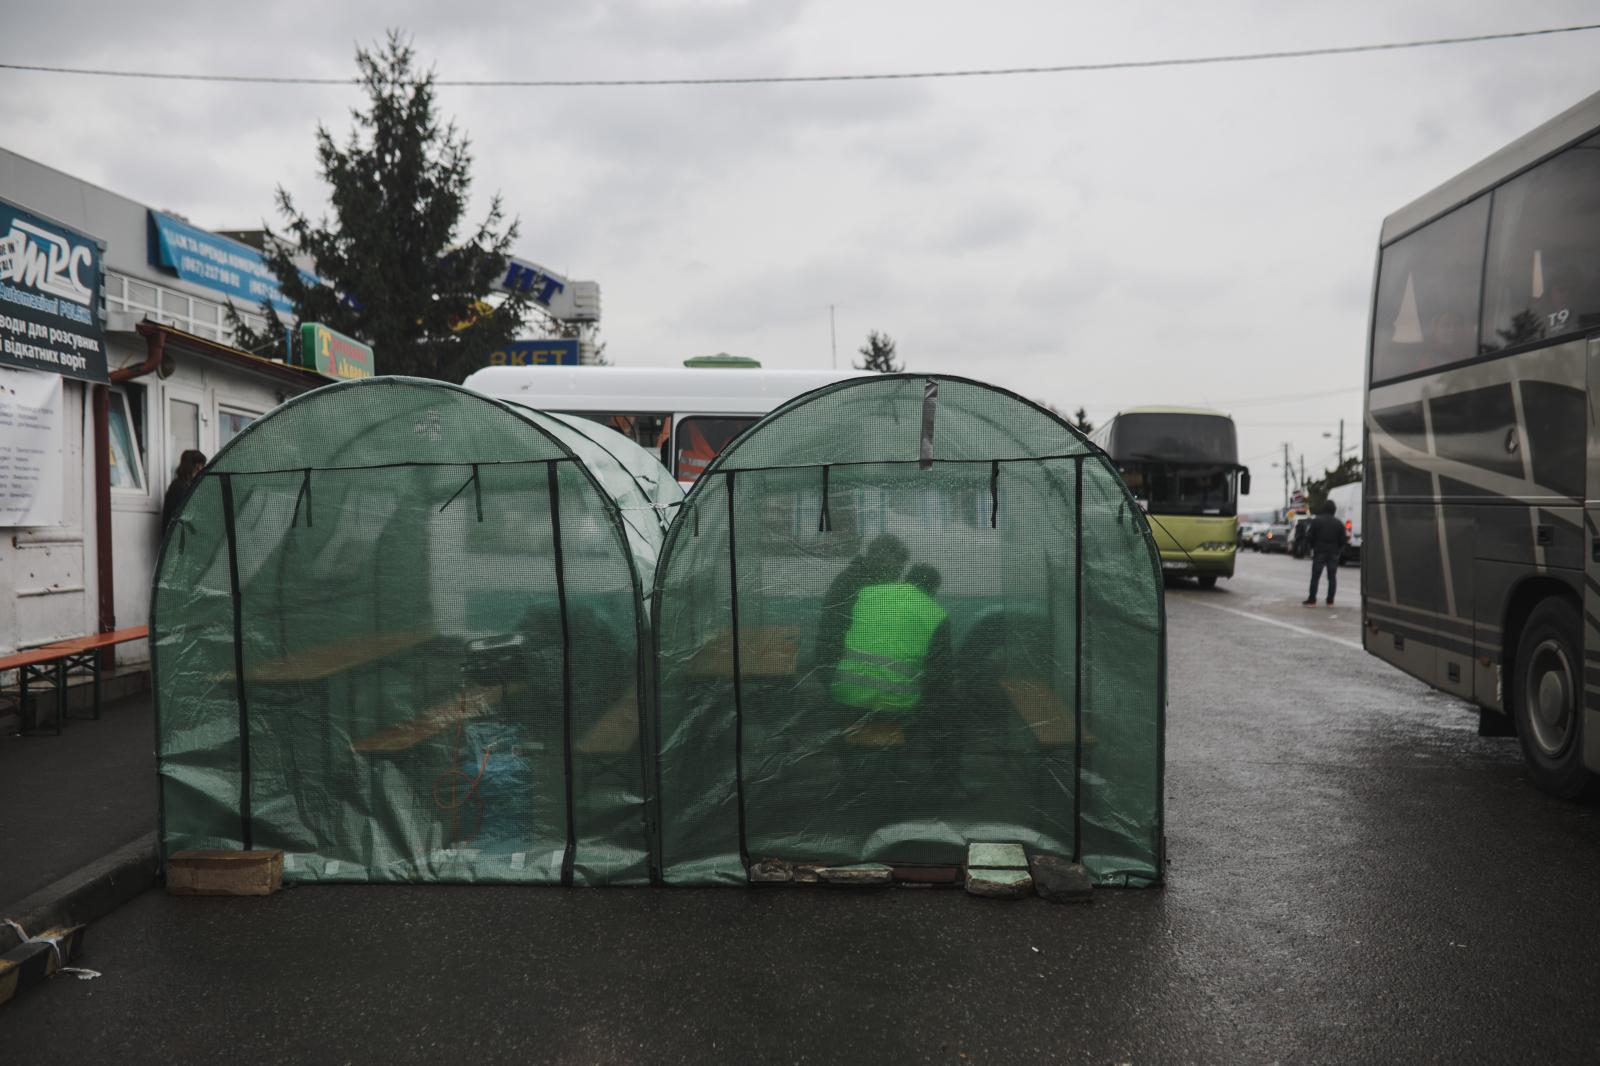 Anadolu/Getty - Russian attacks on Ukraine - Ukranian's refugees leave their loved ones on April 21,...